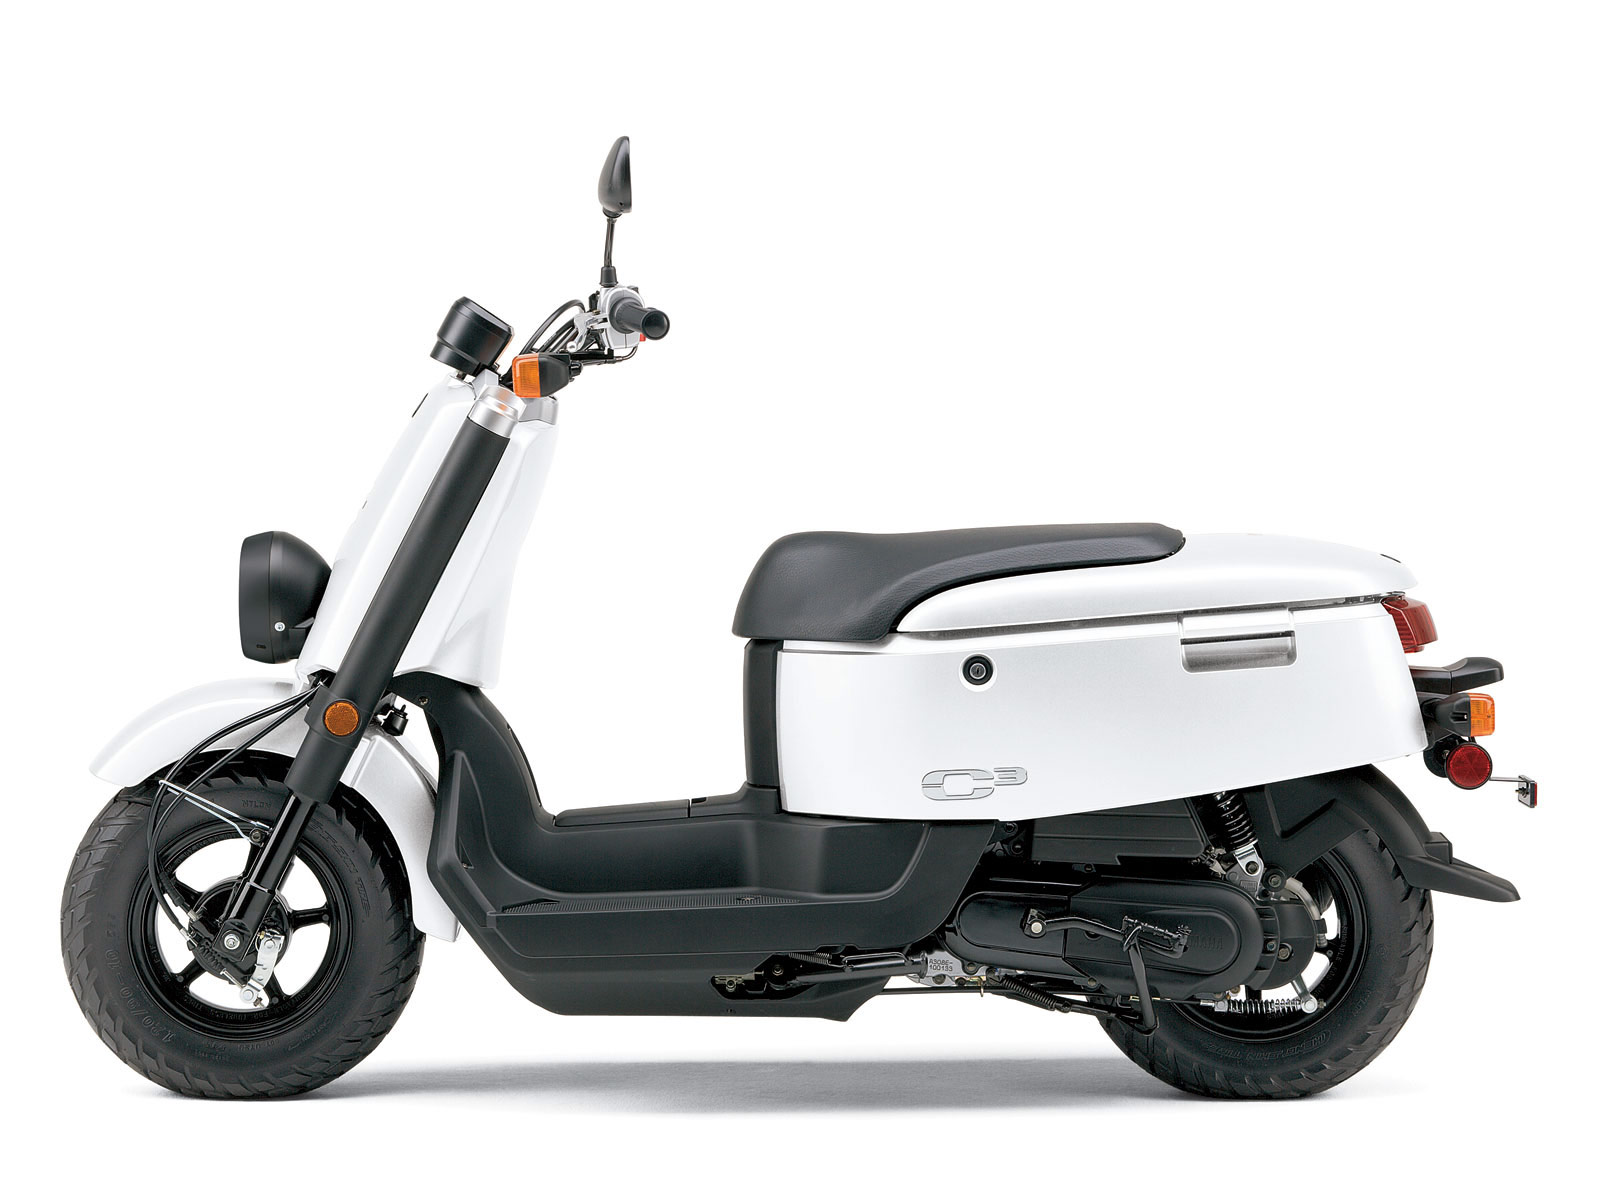 2011 YAMAHA C3 scooter wallpapers | accident lawyers info |